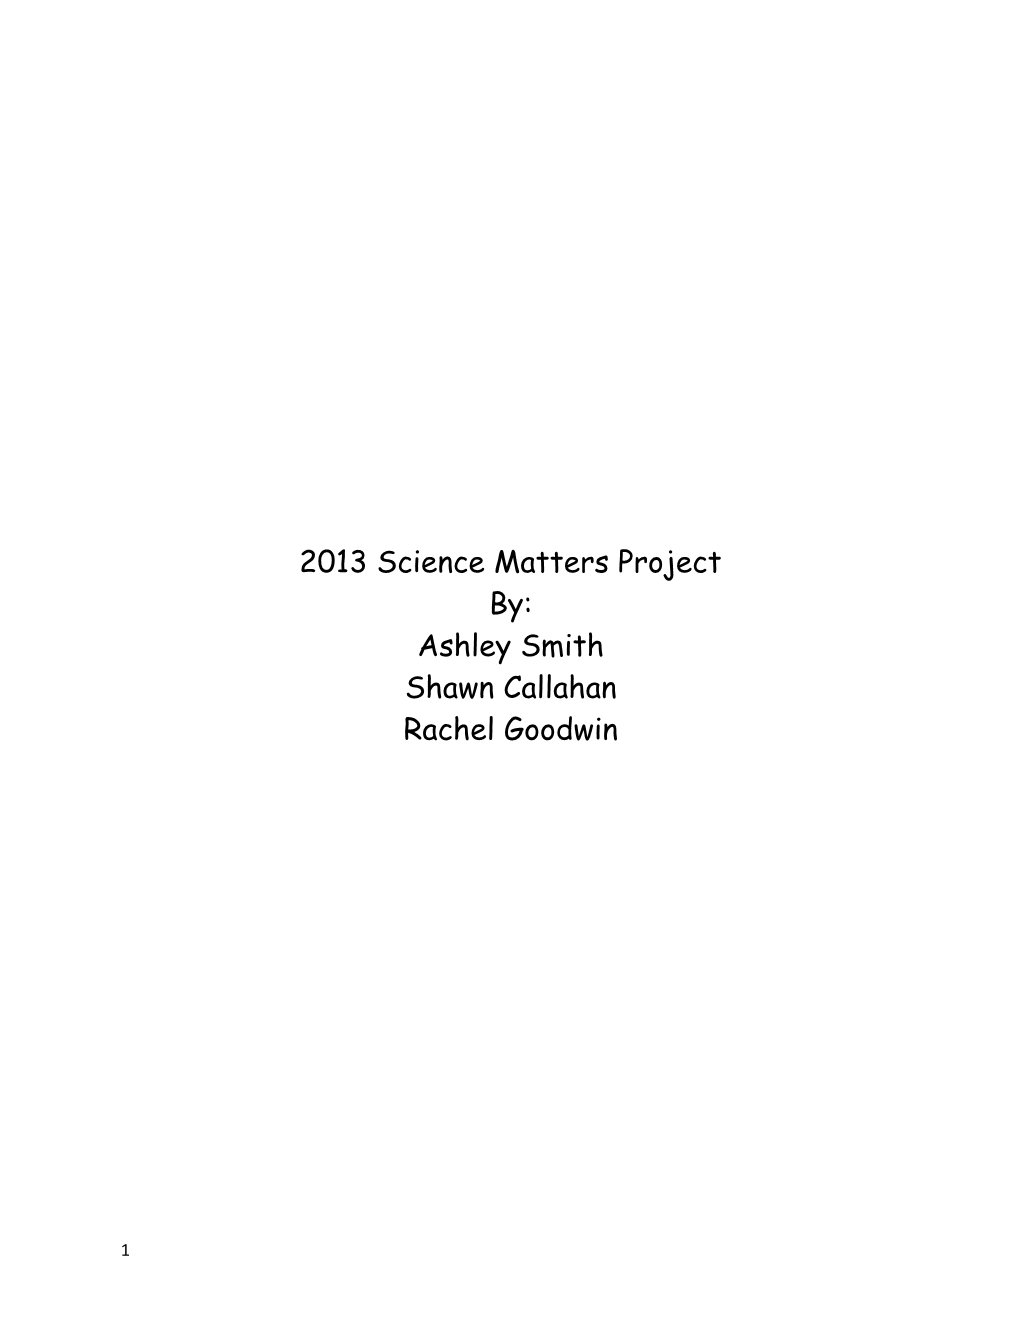 2013 Science Matters Project s1